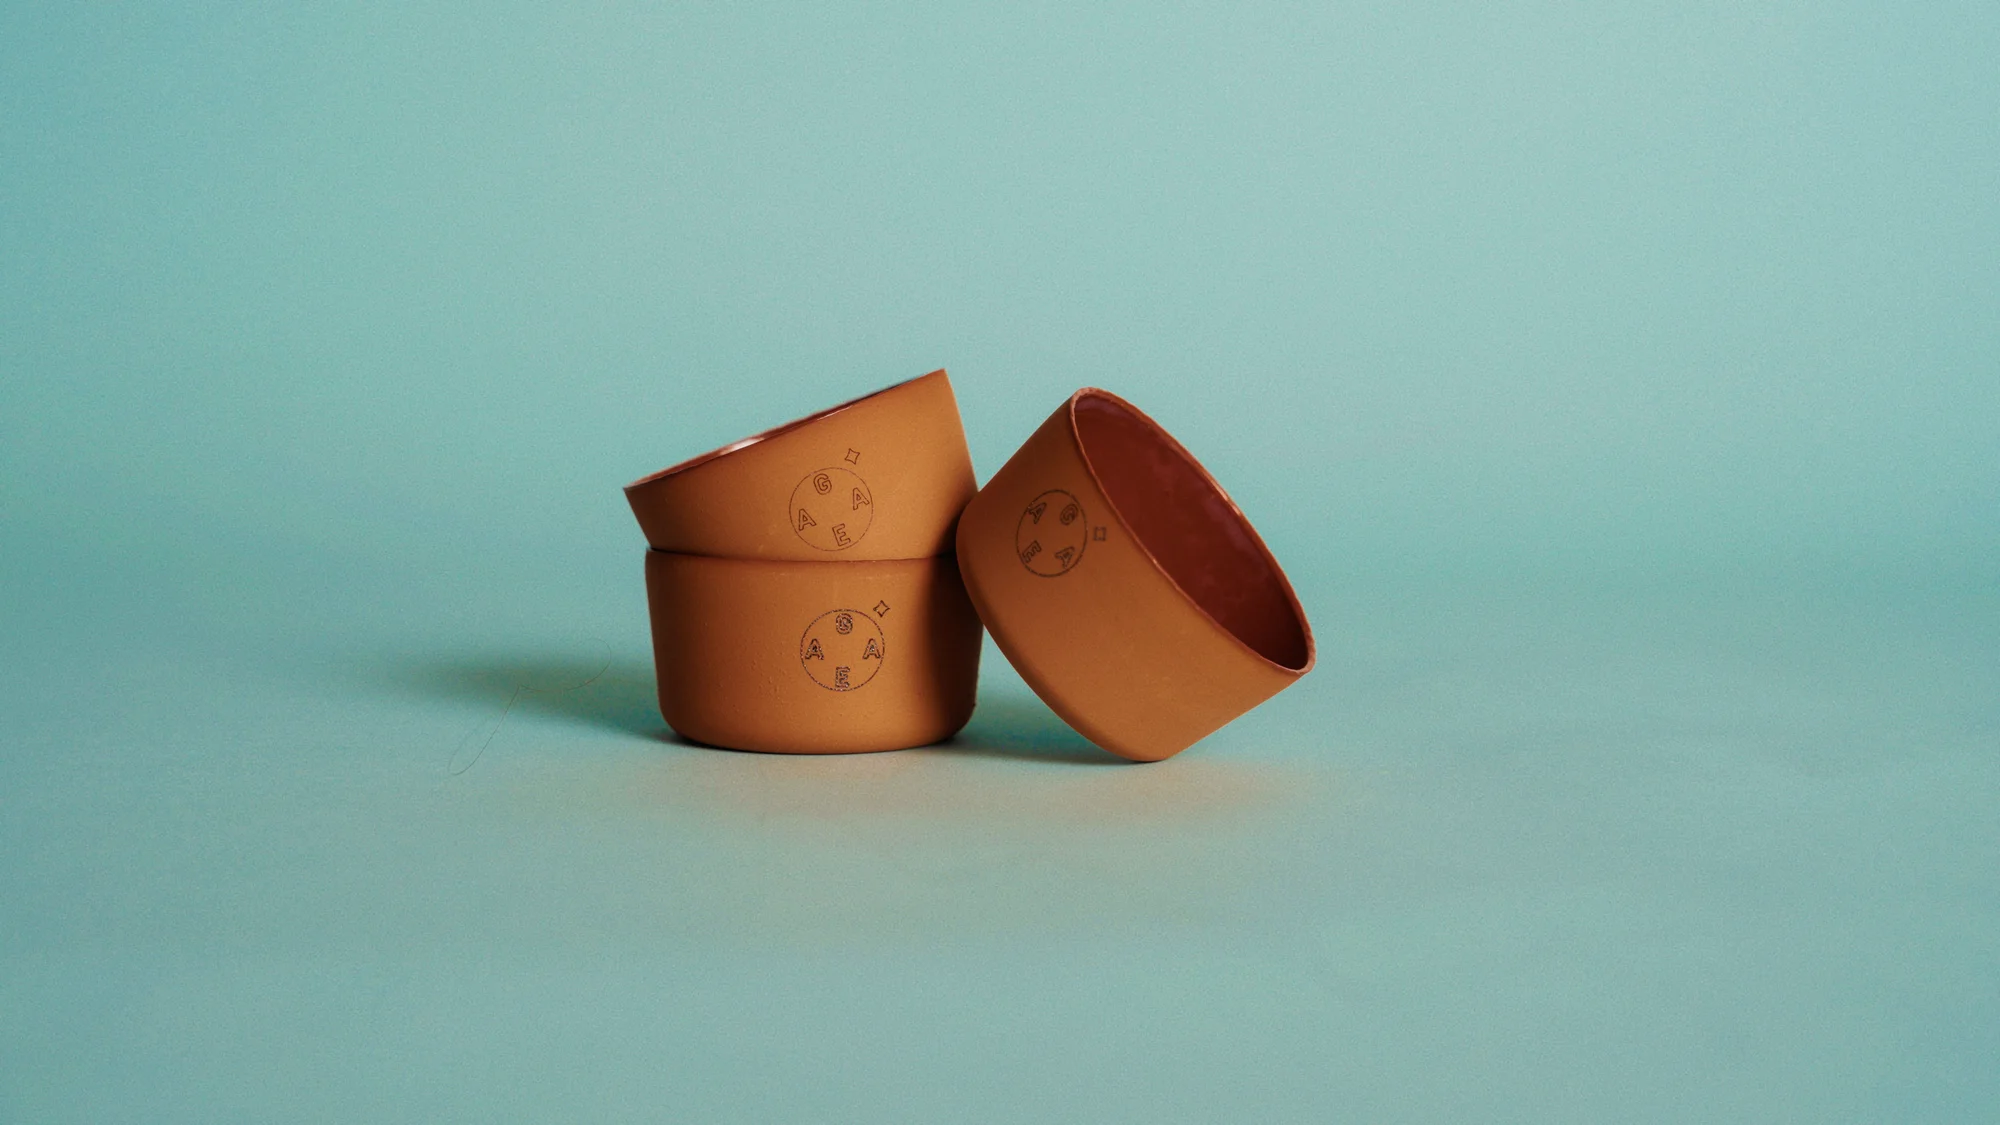 Meet Gaeastar  | Single-Use Plastic Challenge Winner Gaeastar manufactures 3D printed clay cups and were chosen to test their products at select Google foodspaces as part of the Single-Use Plastics Challenge.